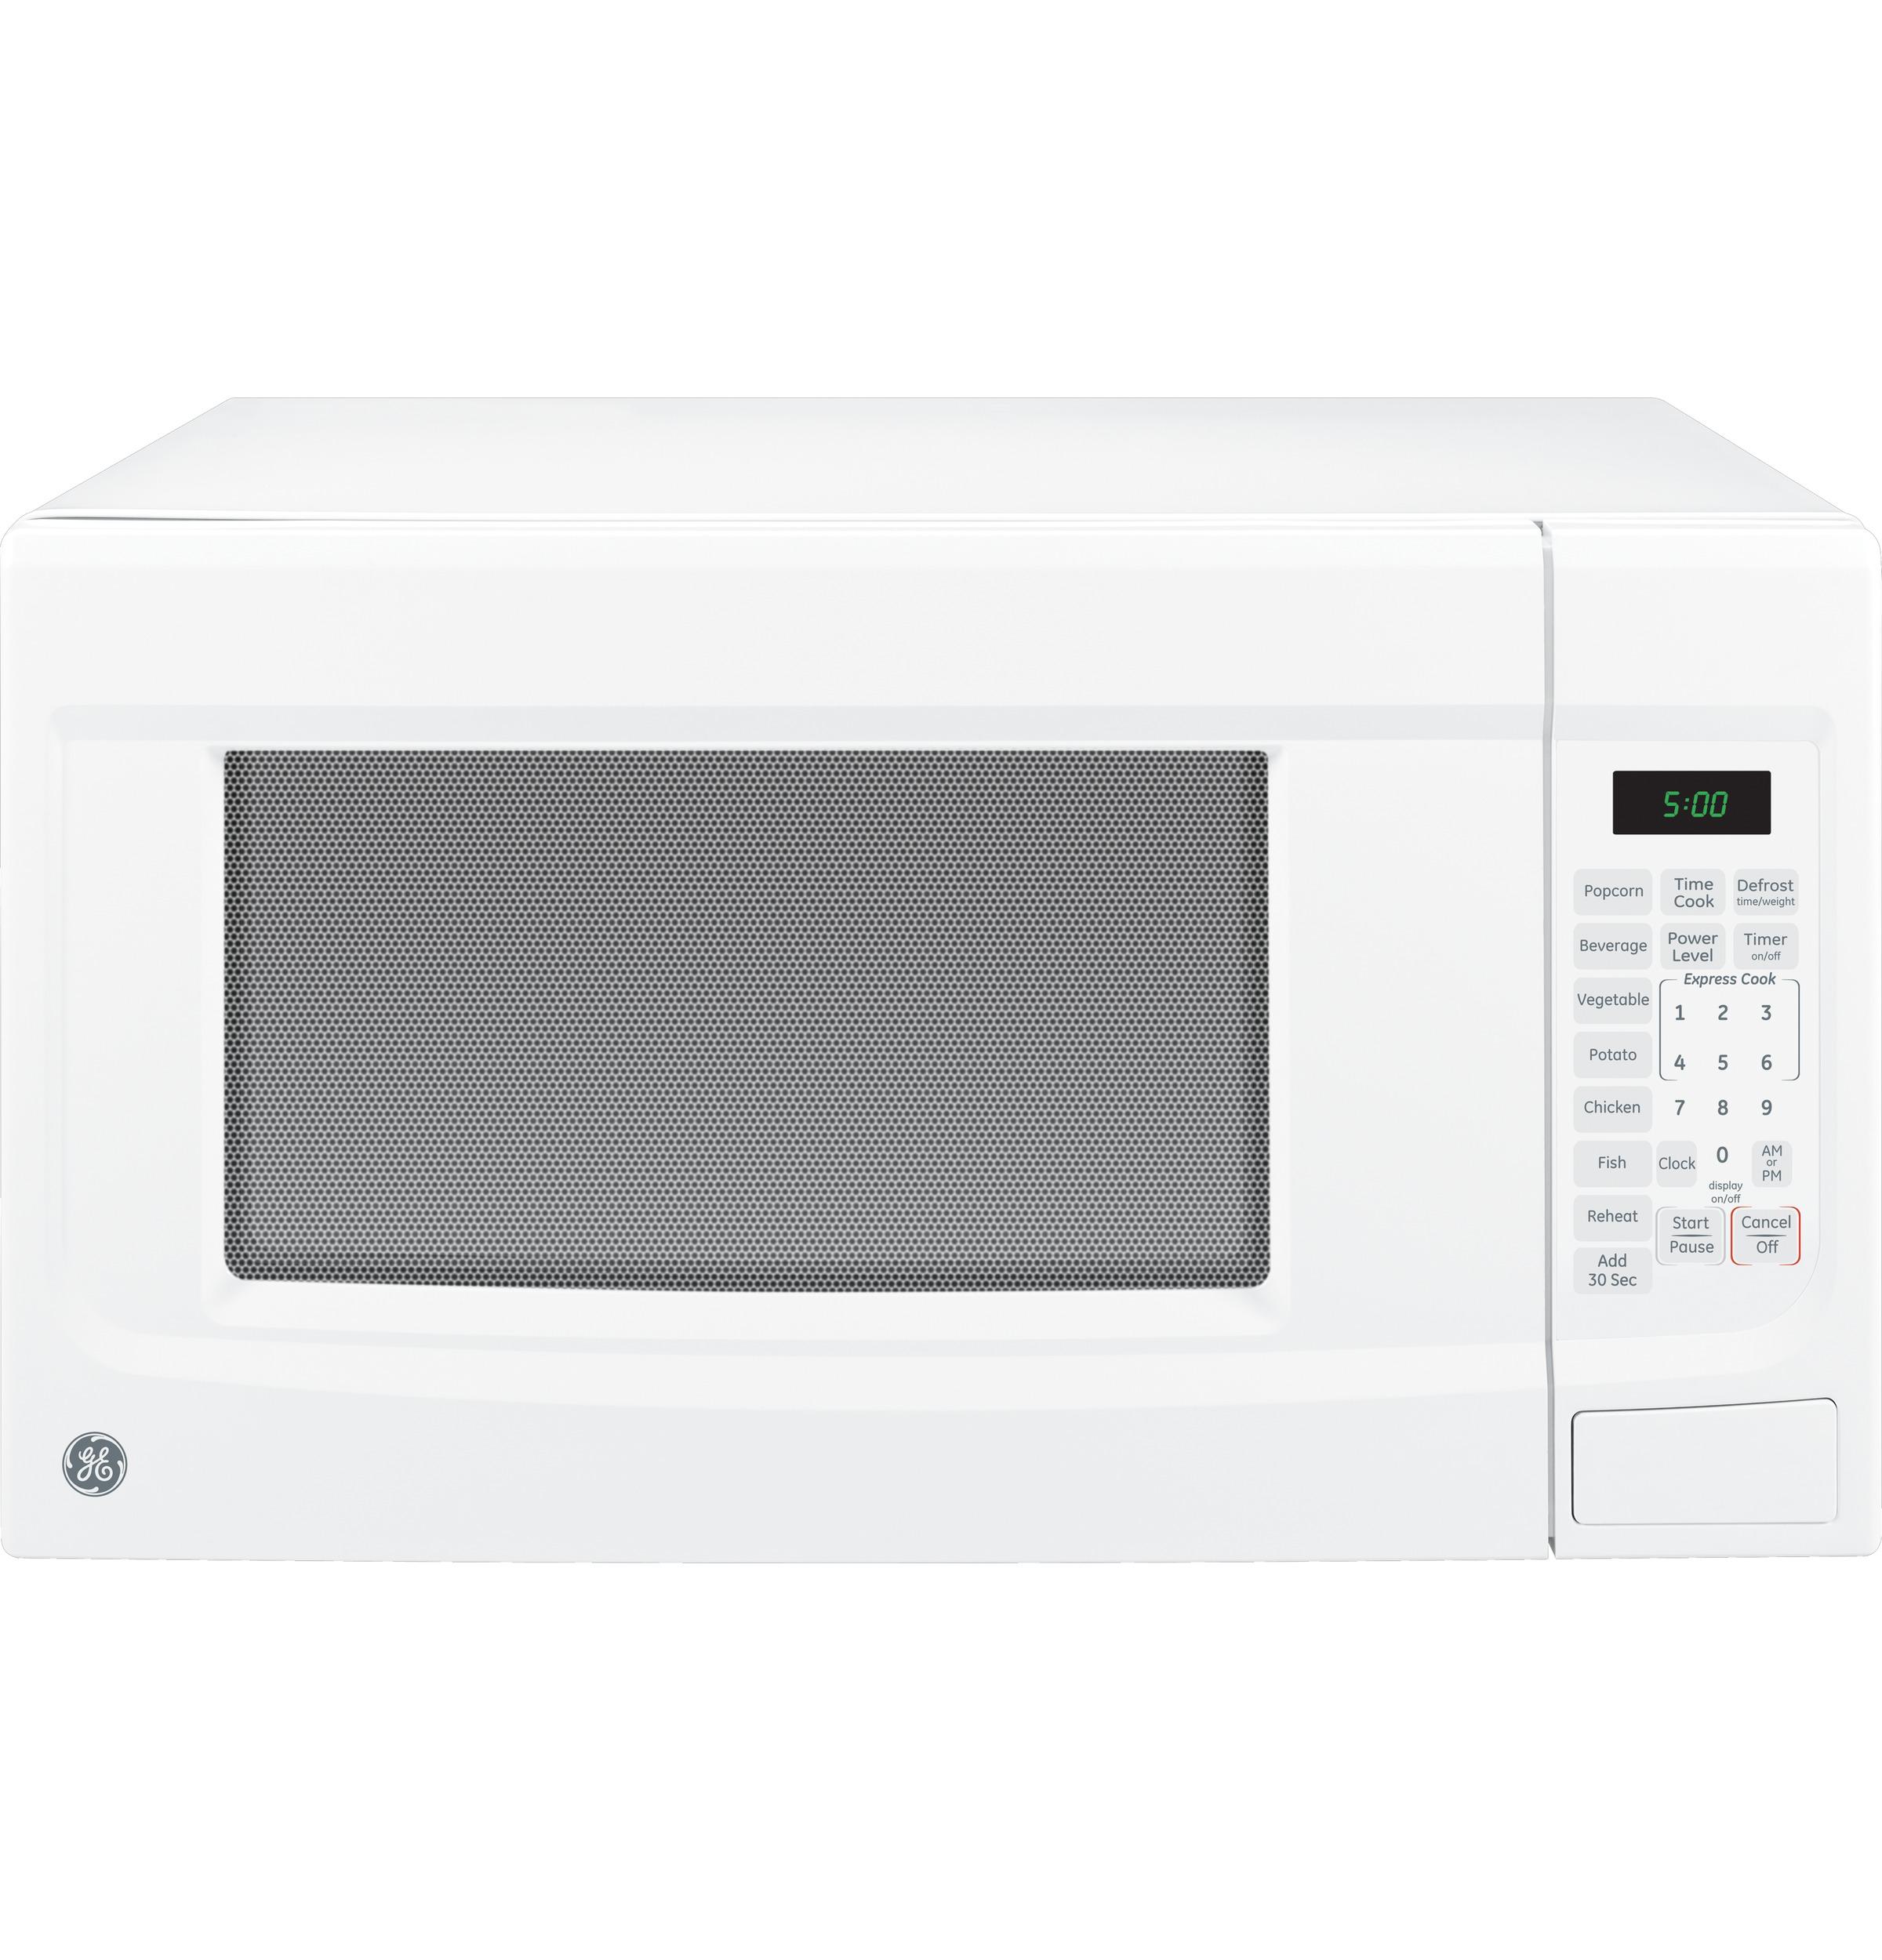 General Electric JES1460DSWW 22 Inch Countertop Microwave Oven White